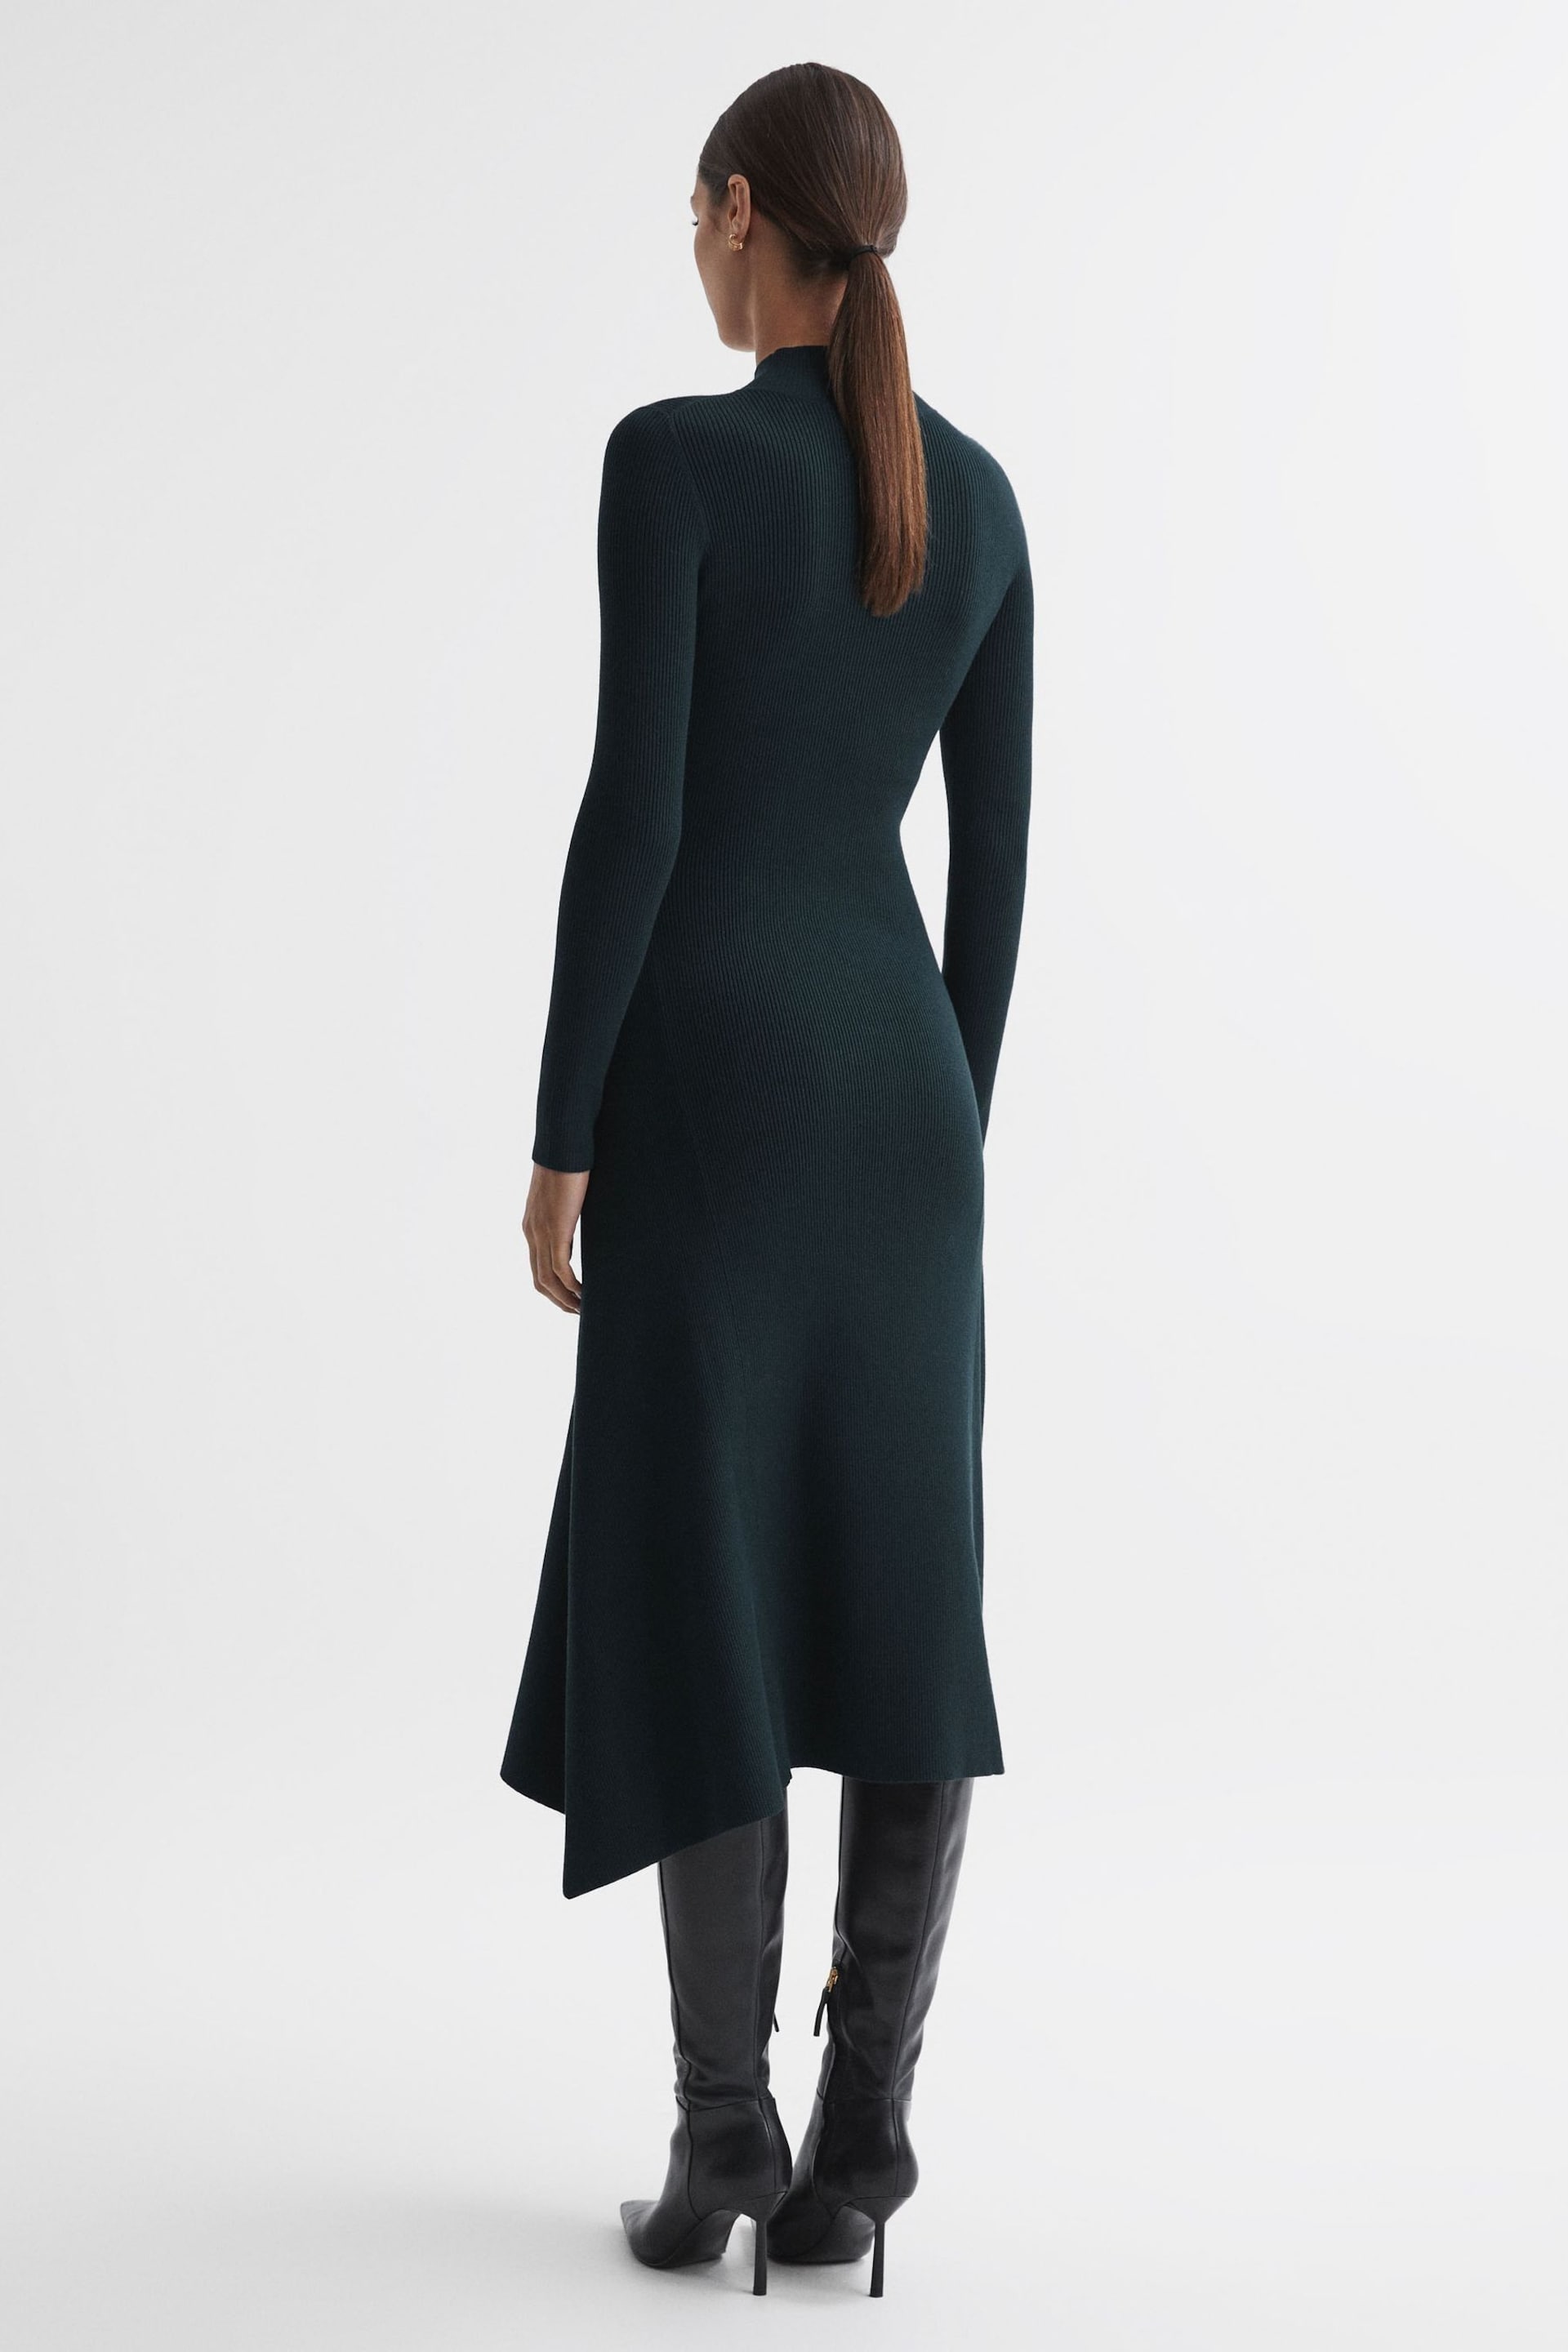 Reiss Teal Chrissy Petite Knitted Bodycon Midi Dress - Image 5 of 7